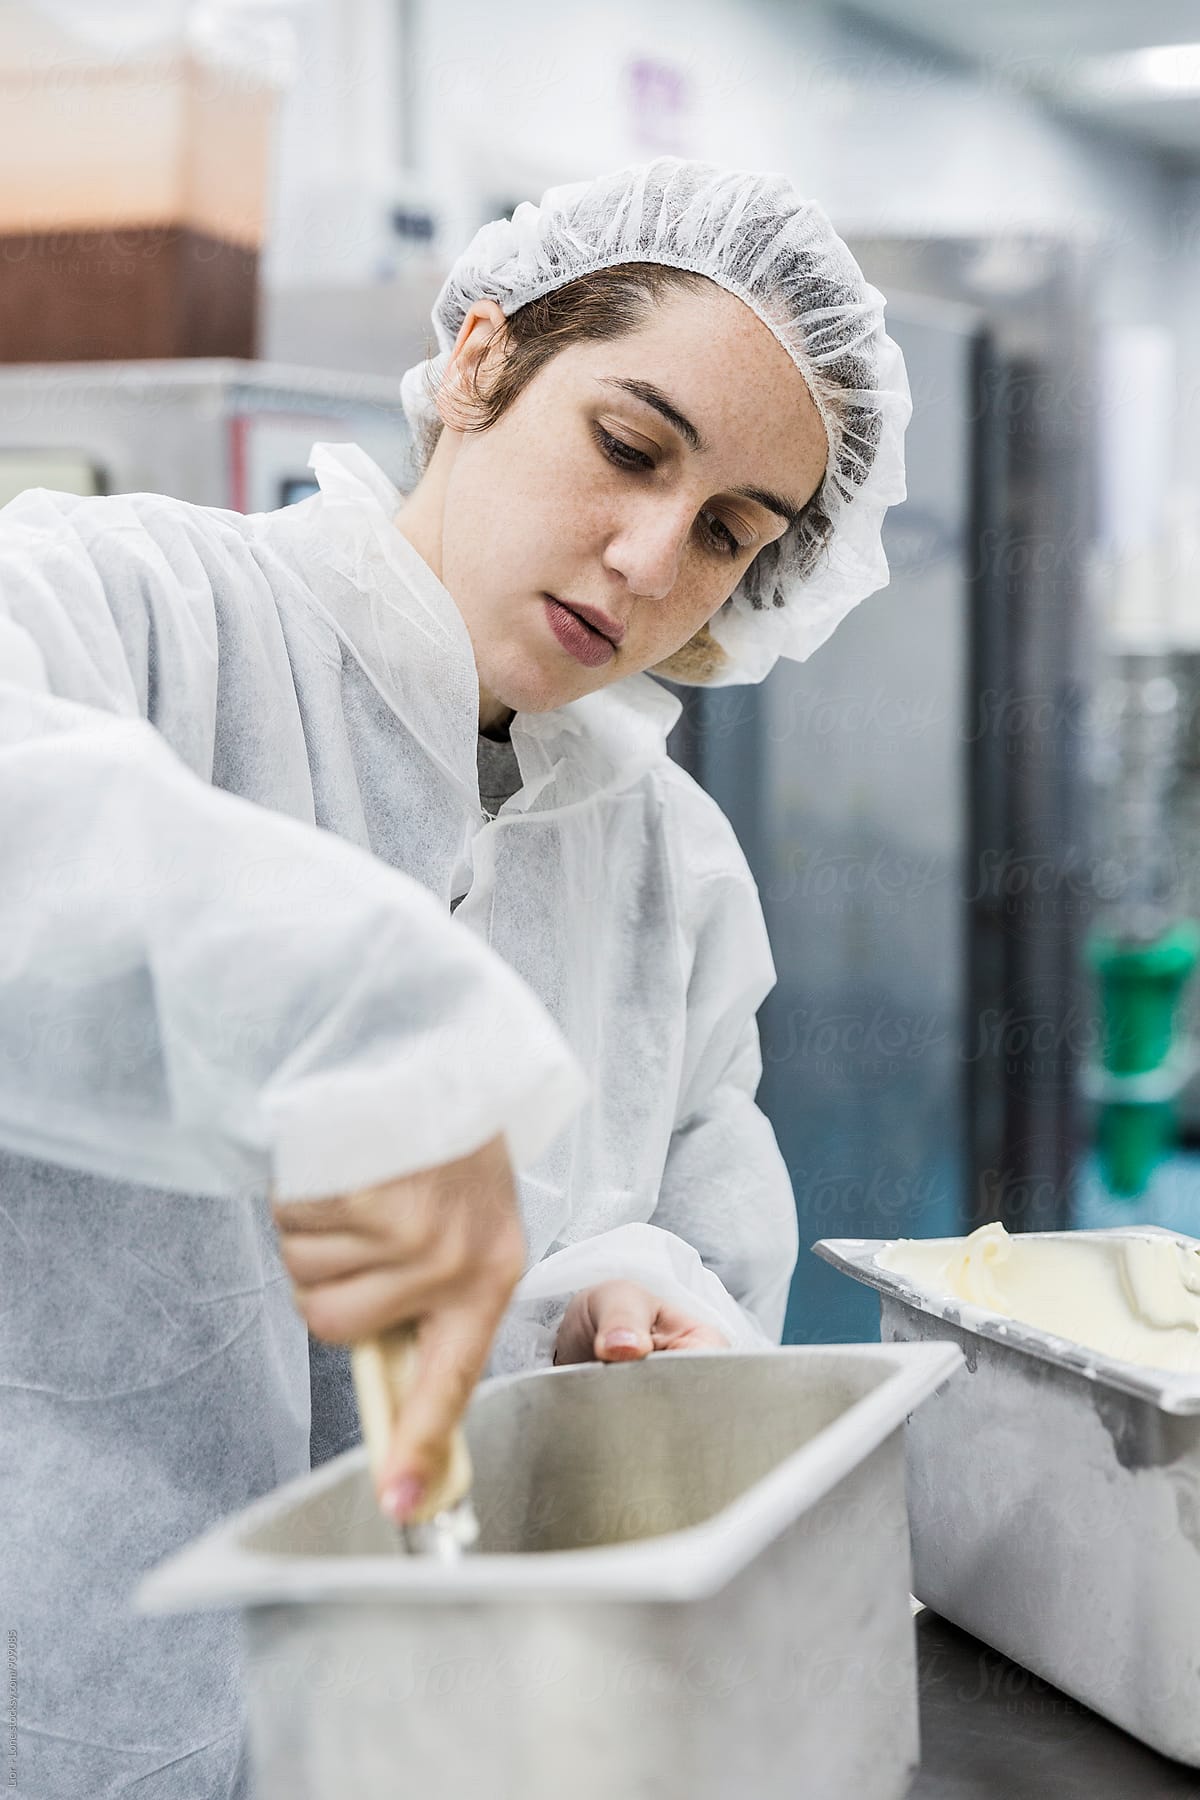 Woman with sterile clothing working in ice cream factory